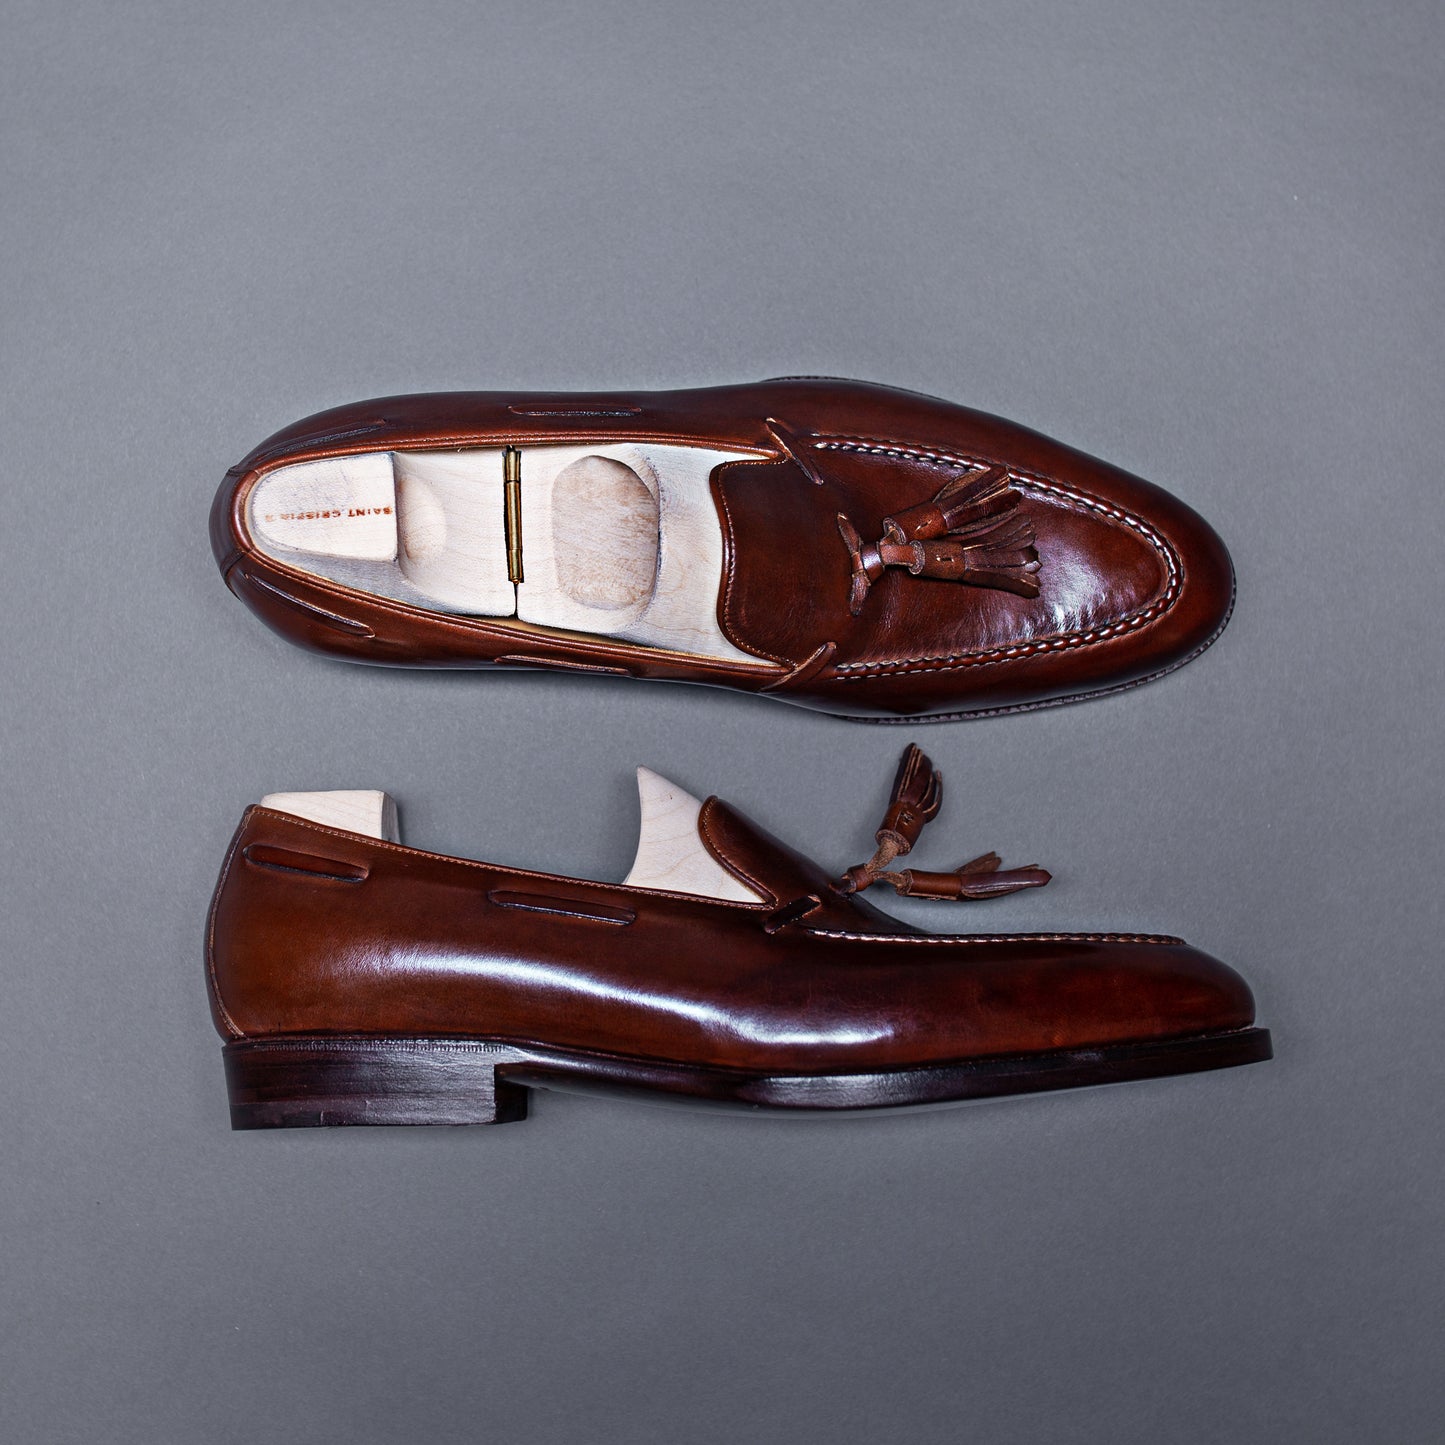 Loafer with hand-stitched apron and tassels, no split toe